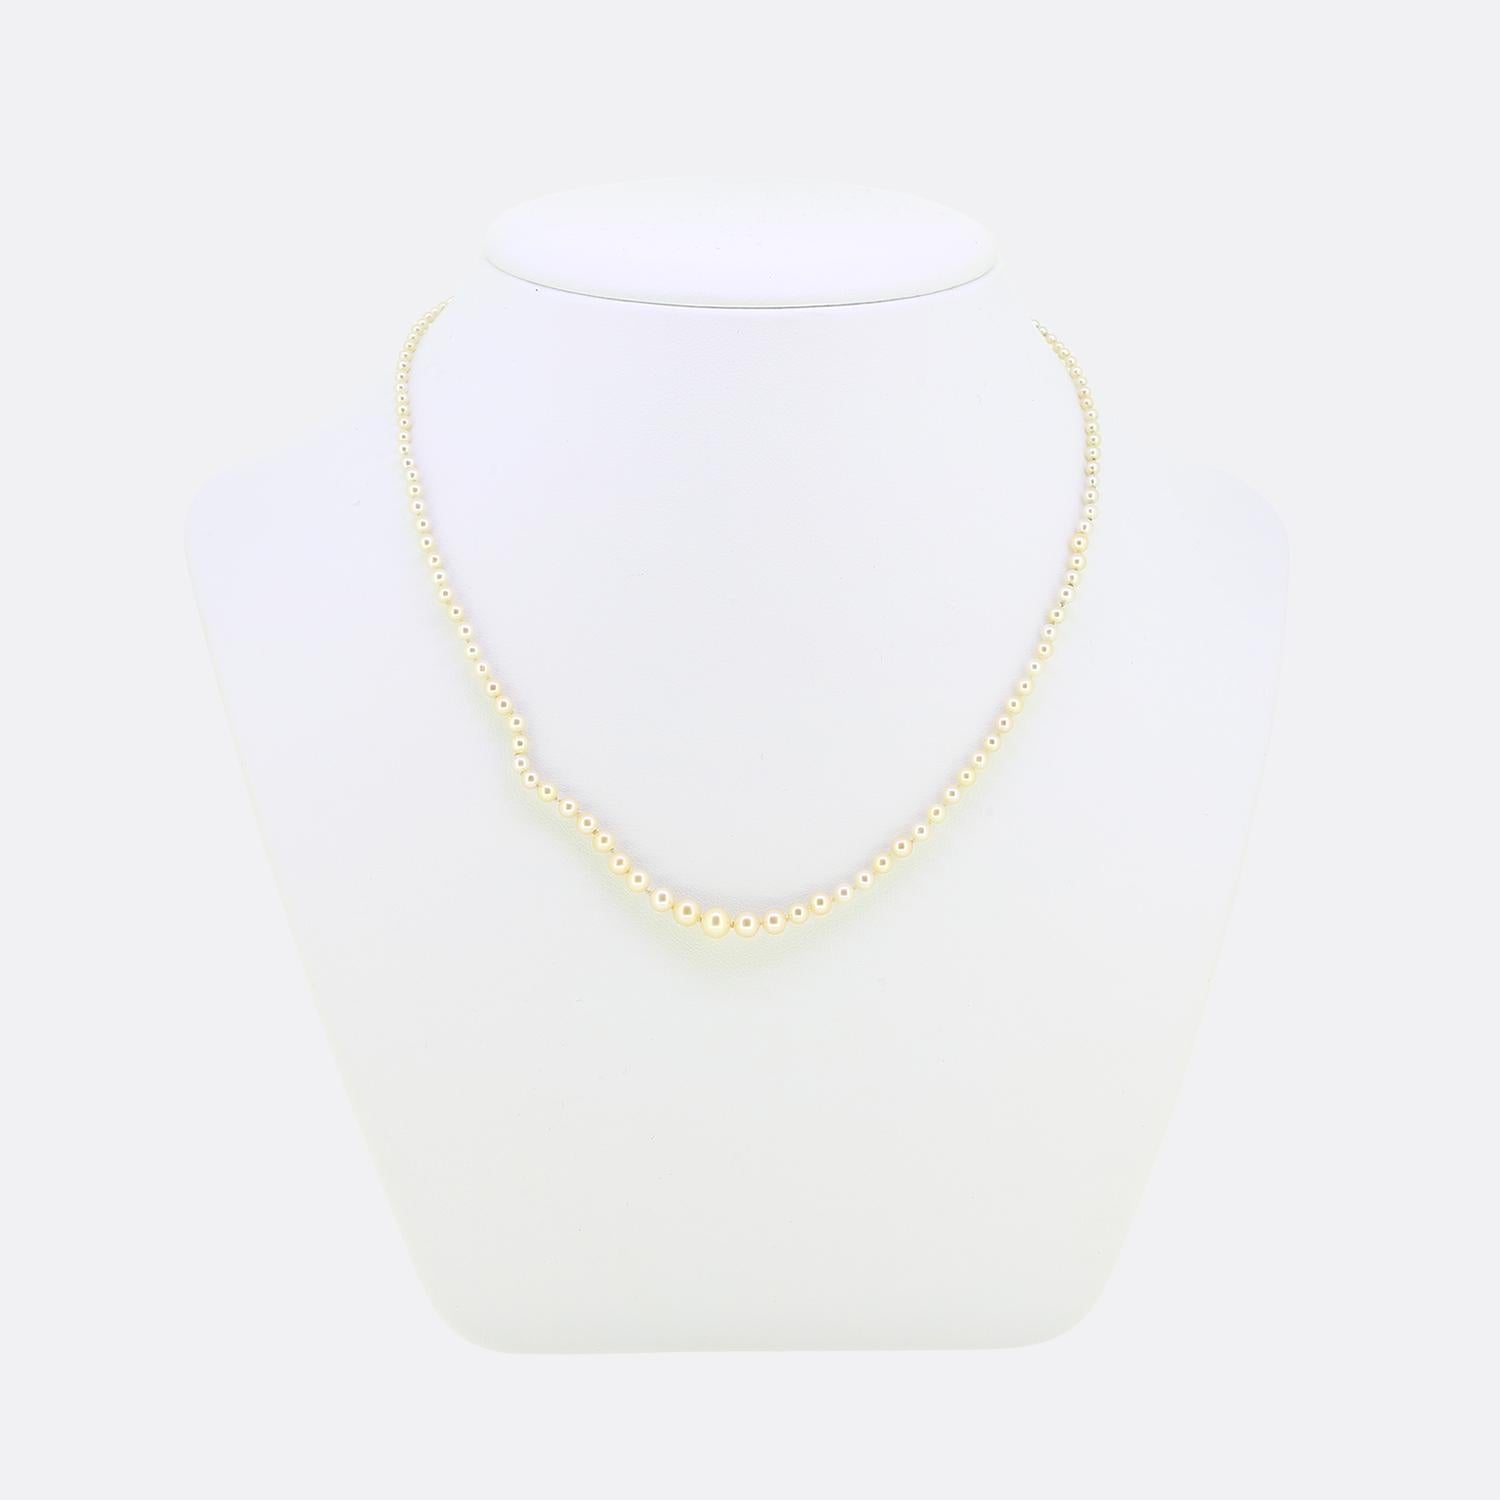 Here we have a gorgeous natural pearl necklace crafted during the pinnacle of the Art Deco movement. This piece consists of a single row of individually knotted round shaped natural saltwater pearls. All stones used here collectively graduate in